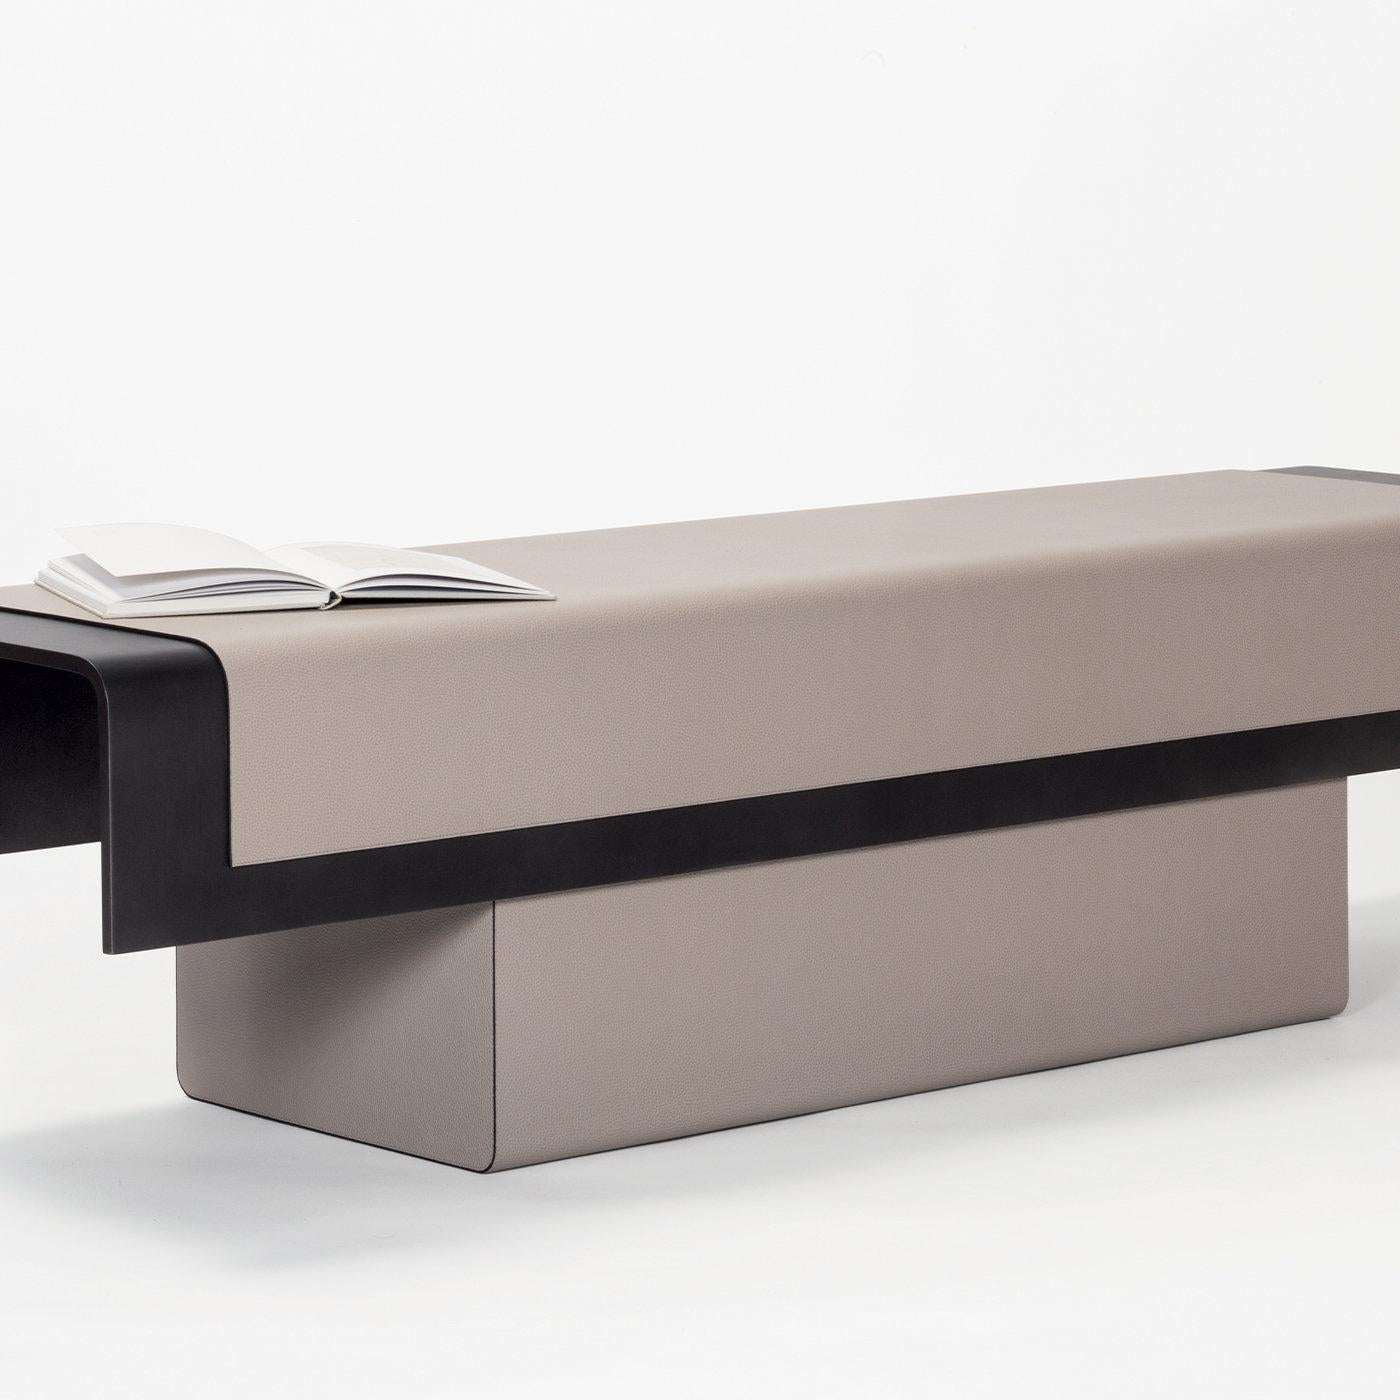 Contemporary leather bench - Pangea by Stephane Parmentier for Giobagnara.
The object presented in the image has following finish: G18 grey printed golf leather and bronze-finished wood.

Featuring a daring balance of contrasting materials and